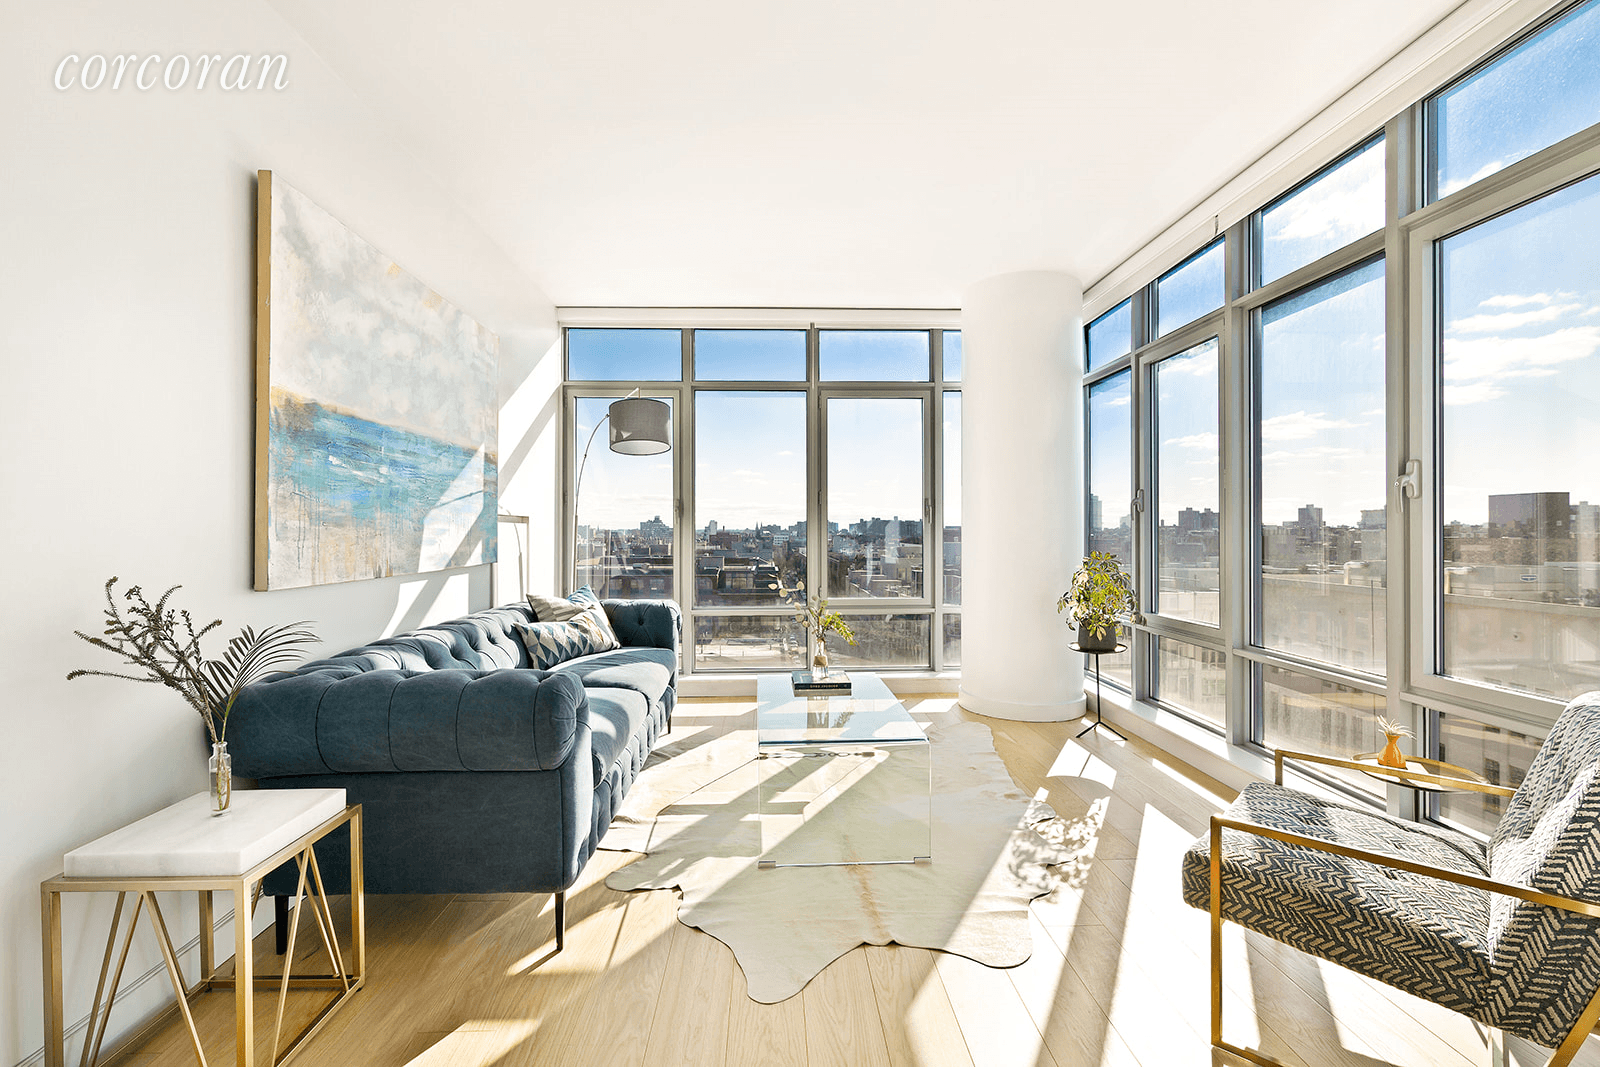 Enjoy sunrise and sunset views in this bright and spacious corner two bedroom, two bathroom at 1 Northside Piers.